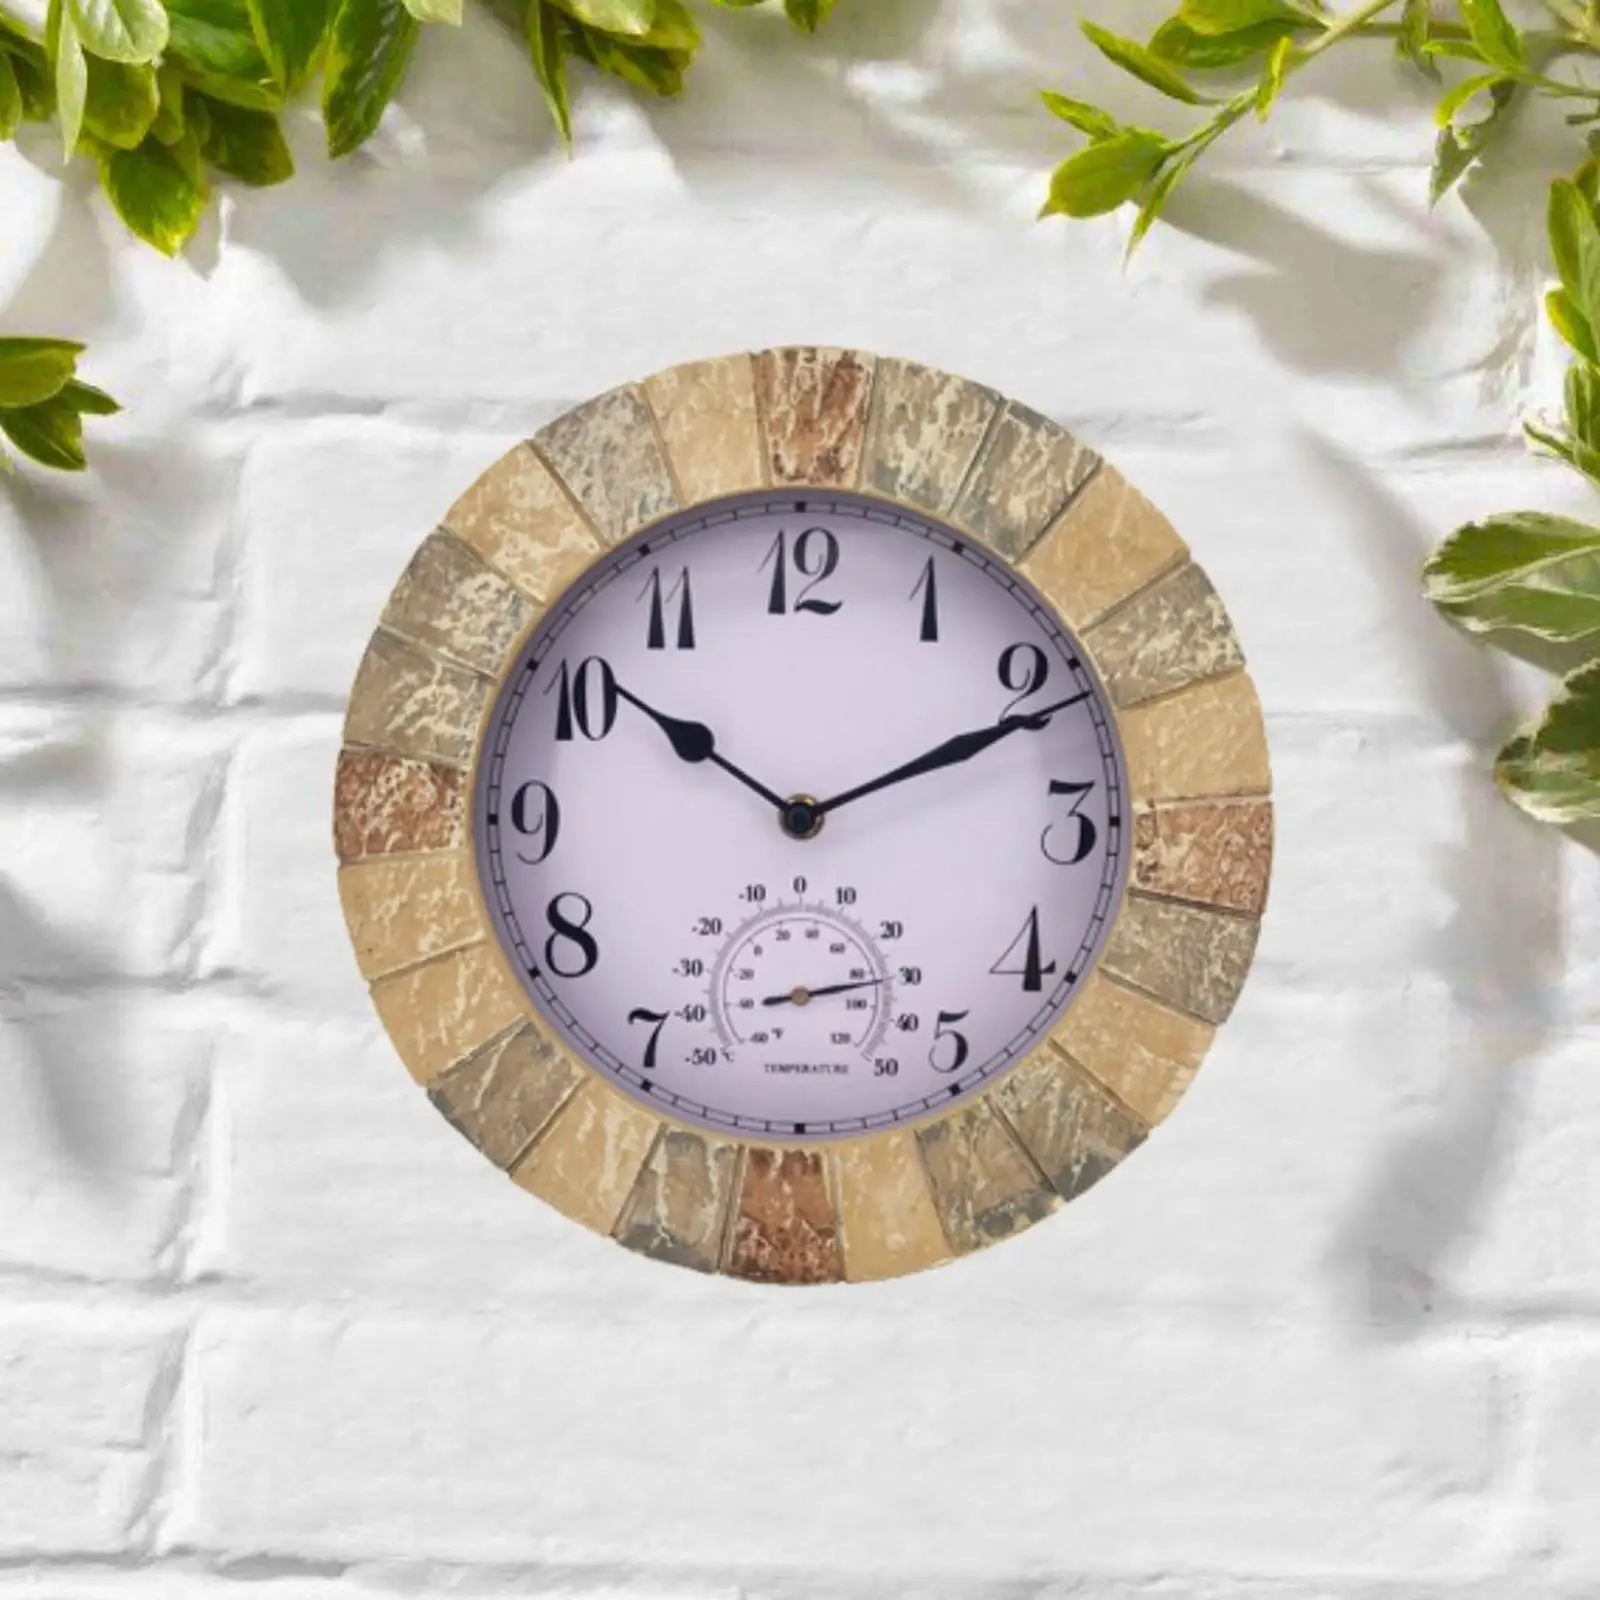 Outdoor Hanging Clock Waterproof with Temperature Silent Resin Crafts 10inch Clocks for Living Room Kitchen Office